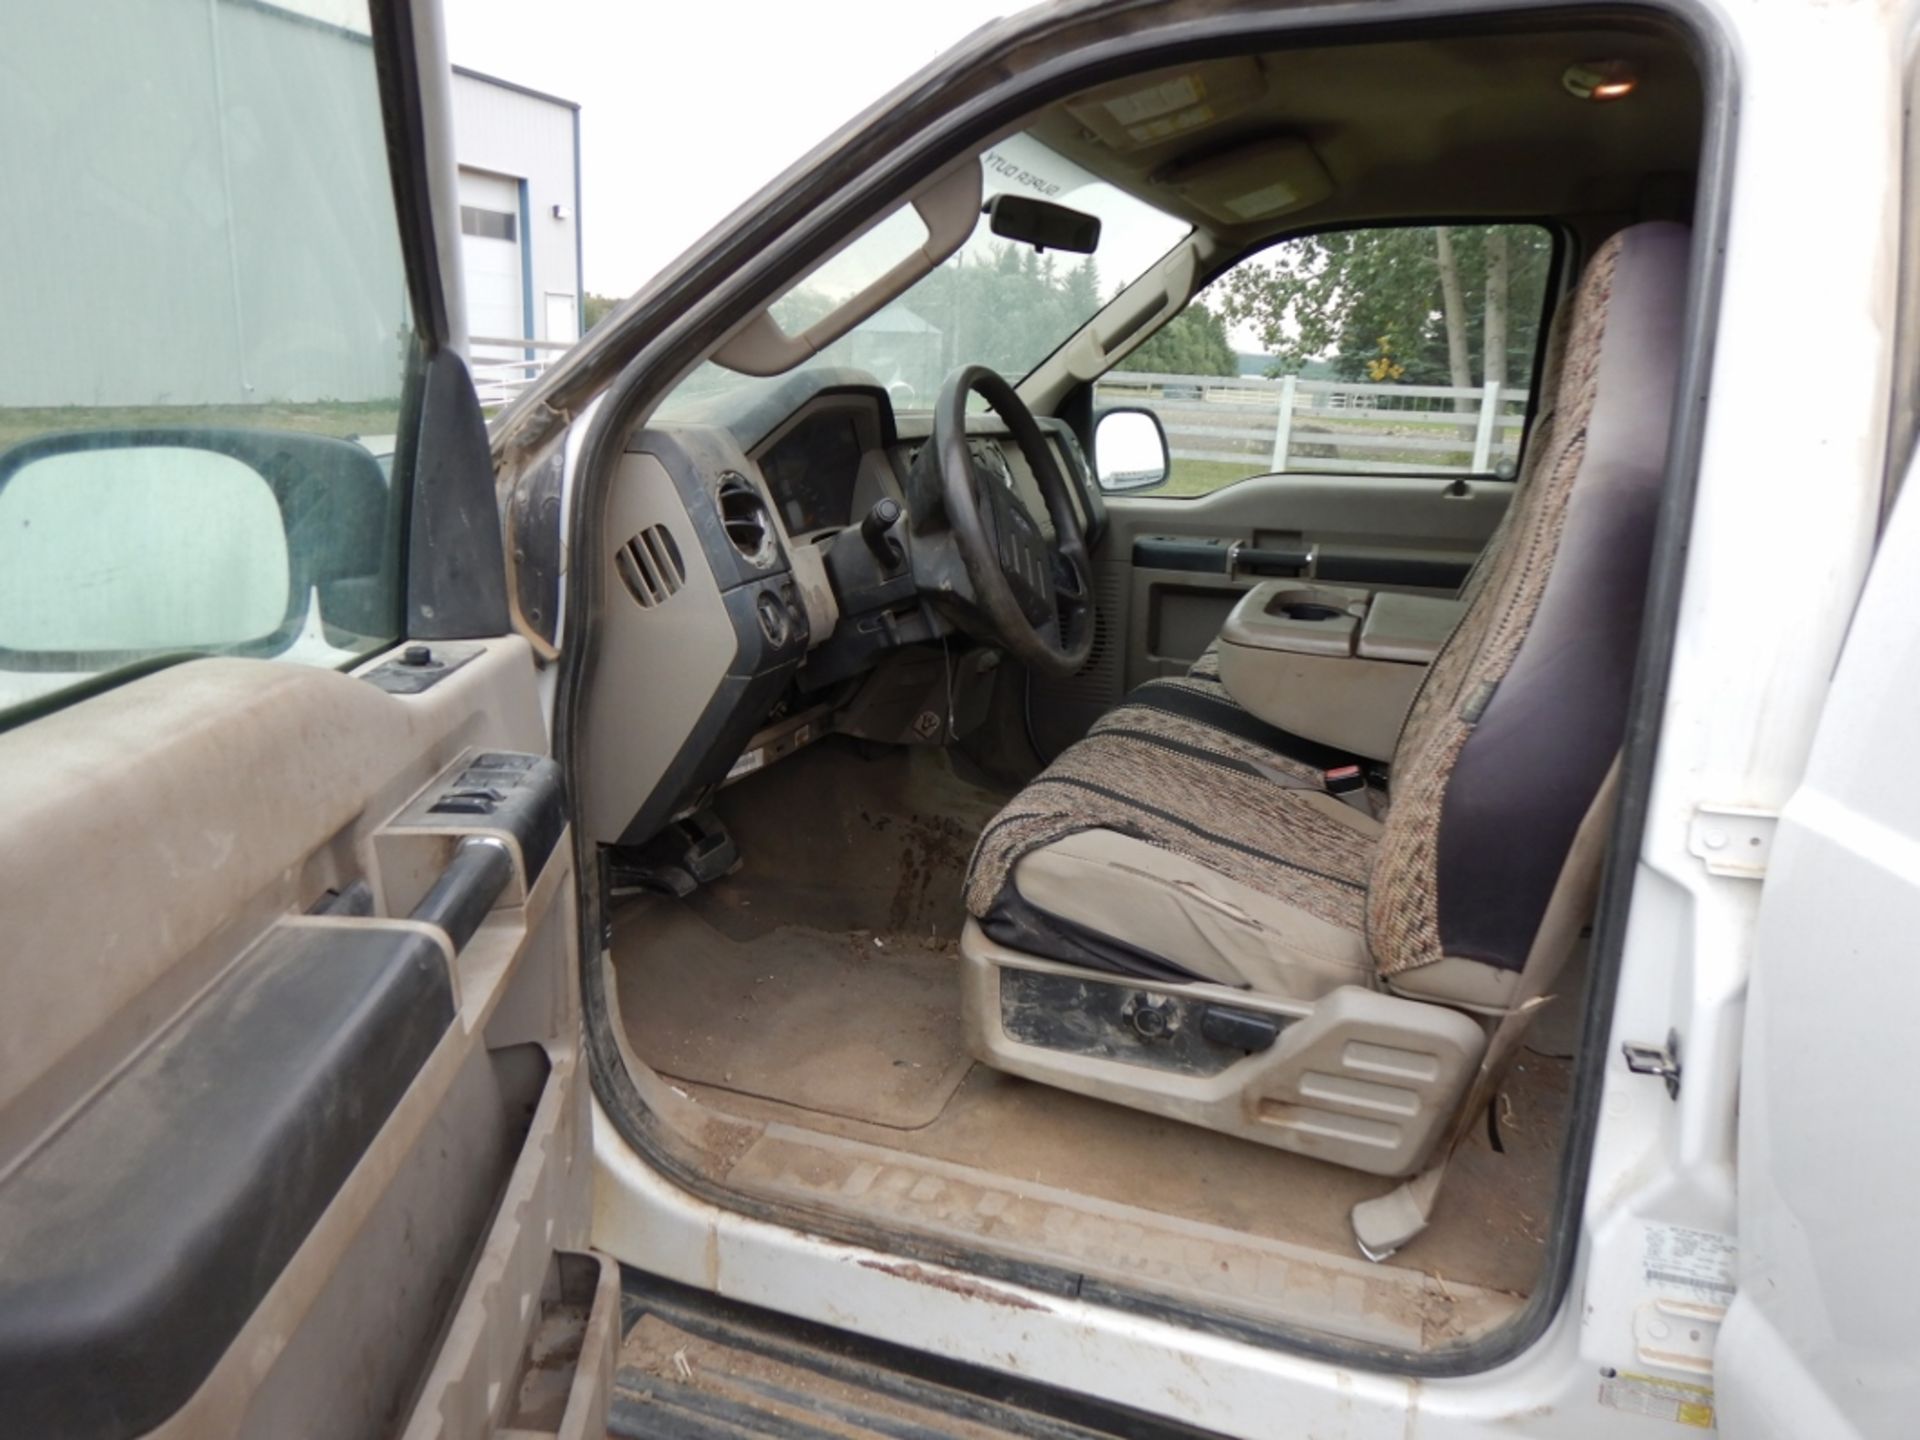 2007 FORD F350 XLT 4X4 V8 P/U TRUCK, A/T, CREW CAB, 8FT BOX (DAMAGED), 362,299 KM'S SHOWING - Image 8 of 10